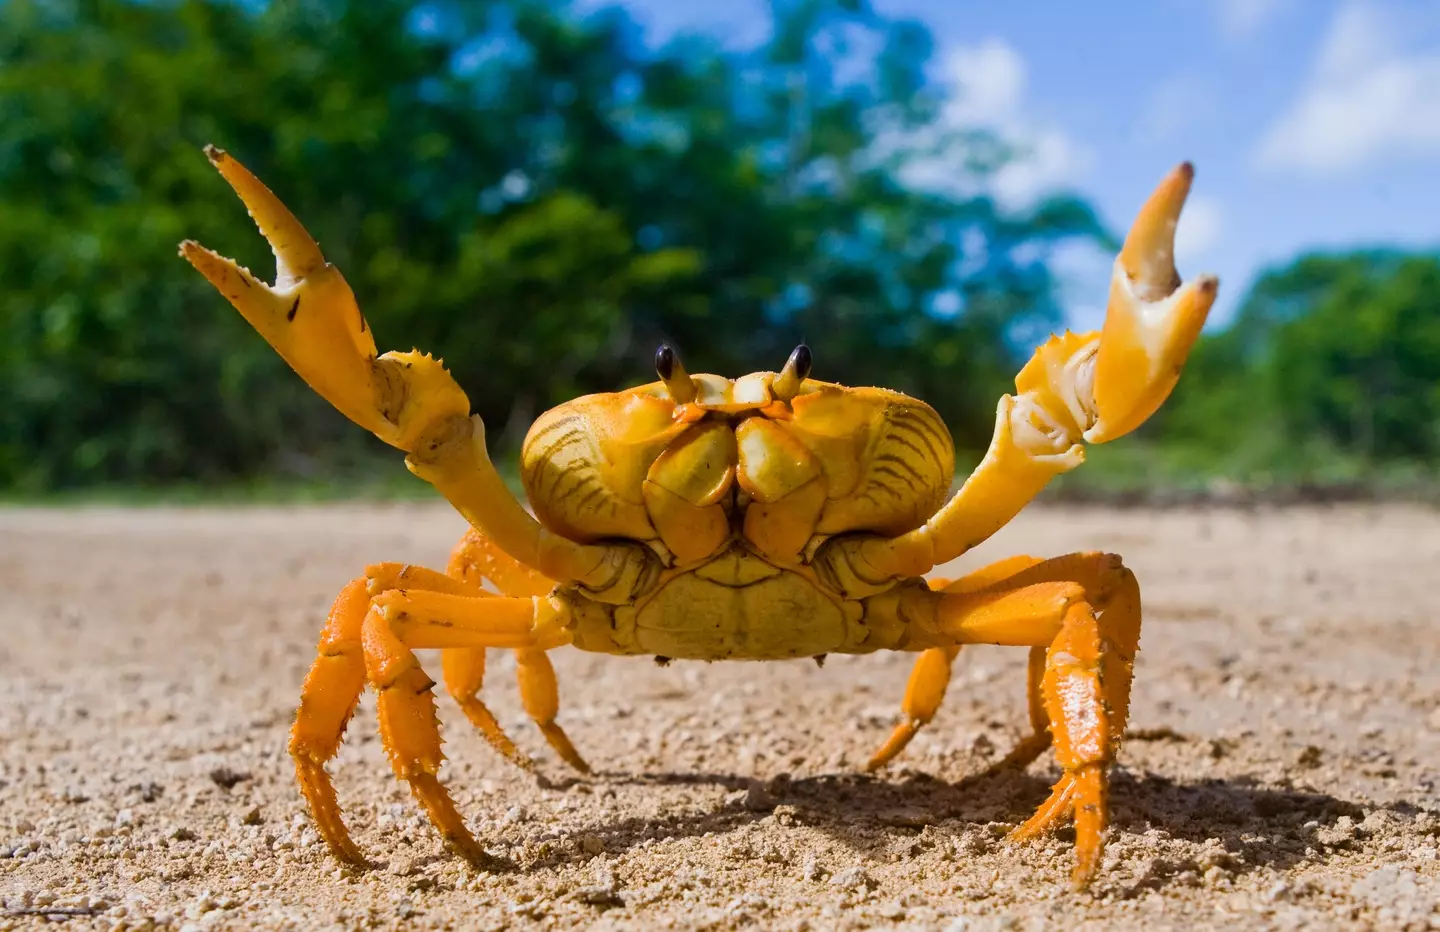 A man swallowed a live crab whole after it bit his daughter.